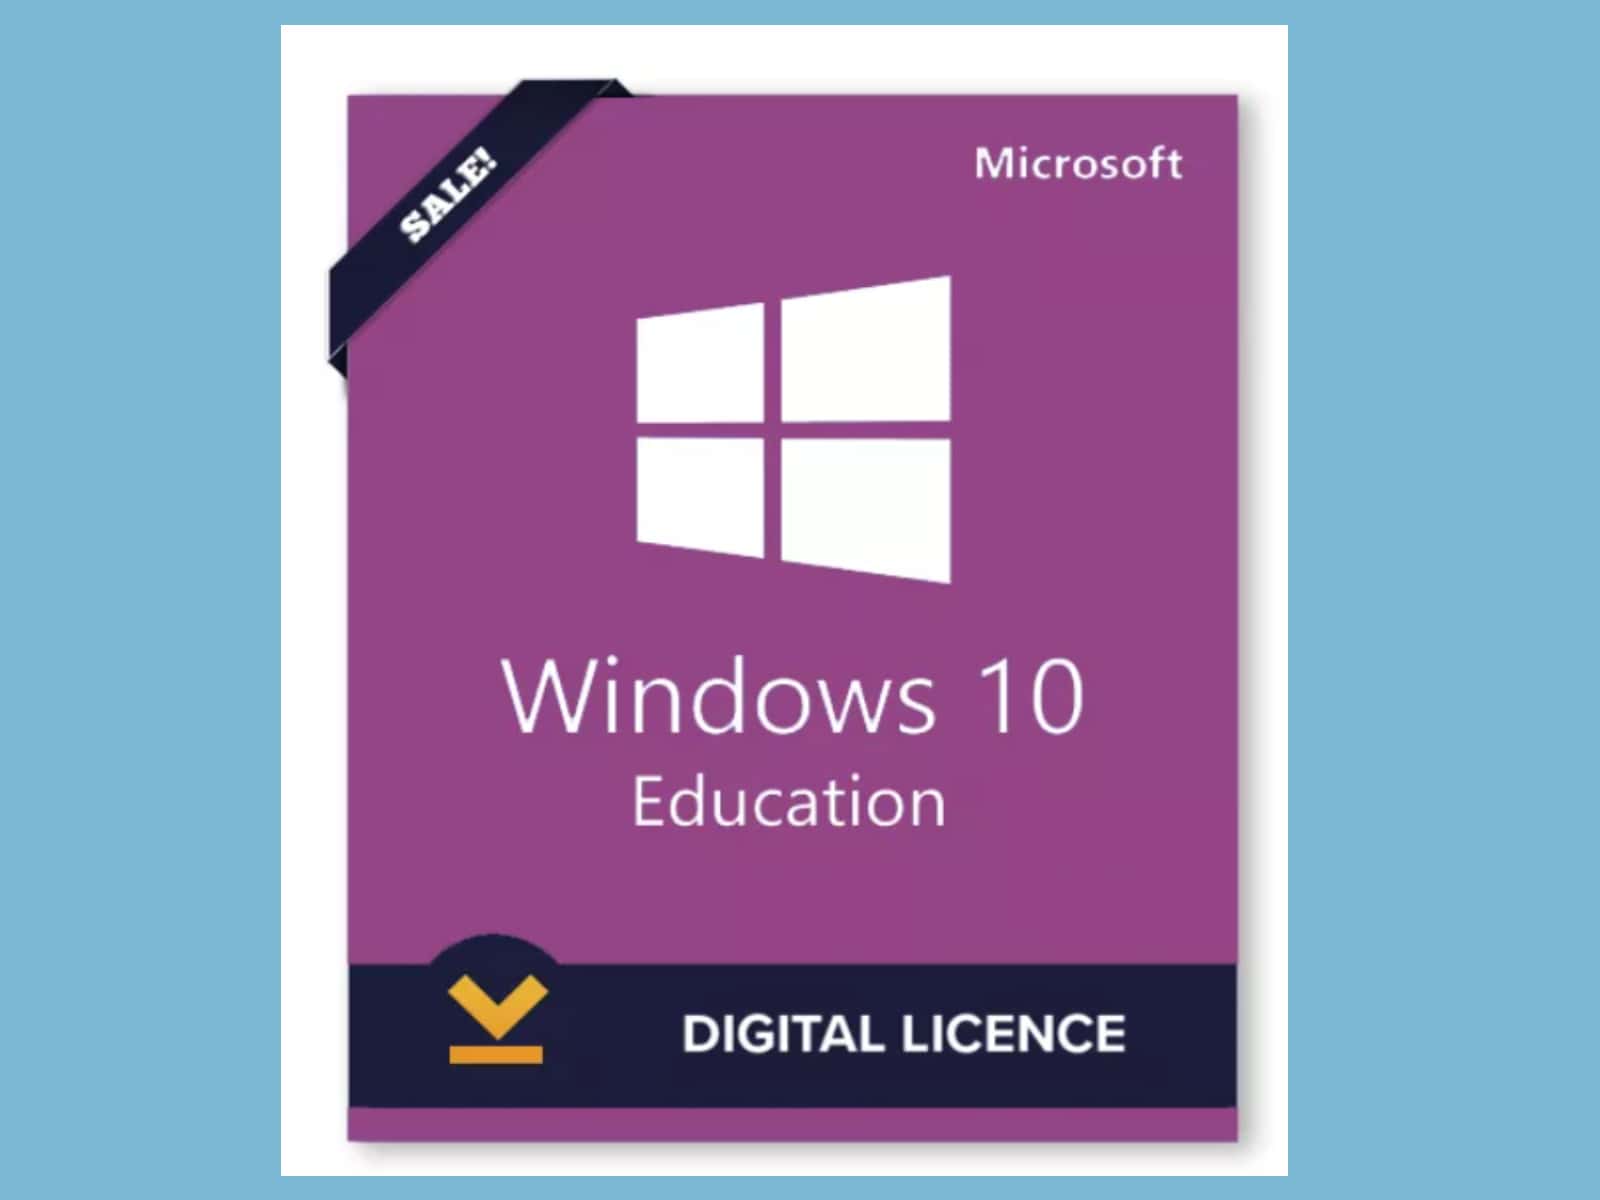 pro or home windows 10 if i have education key